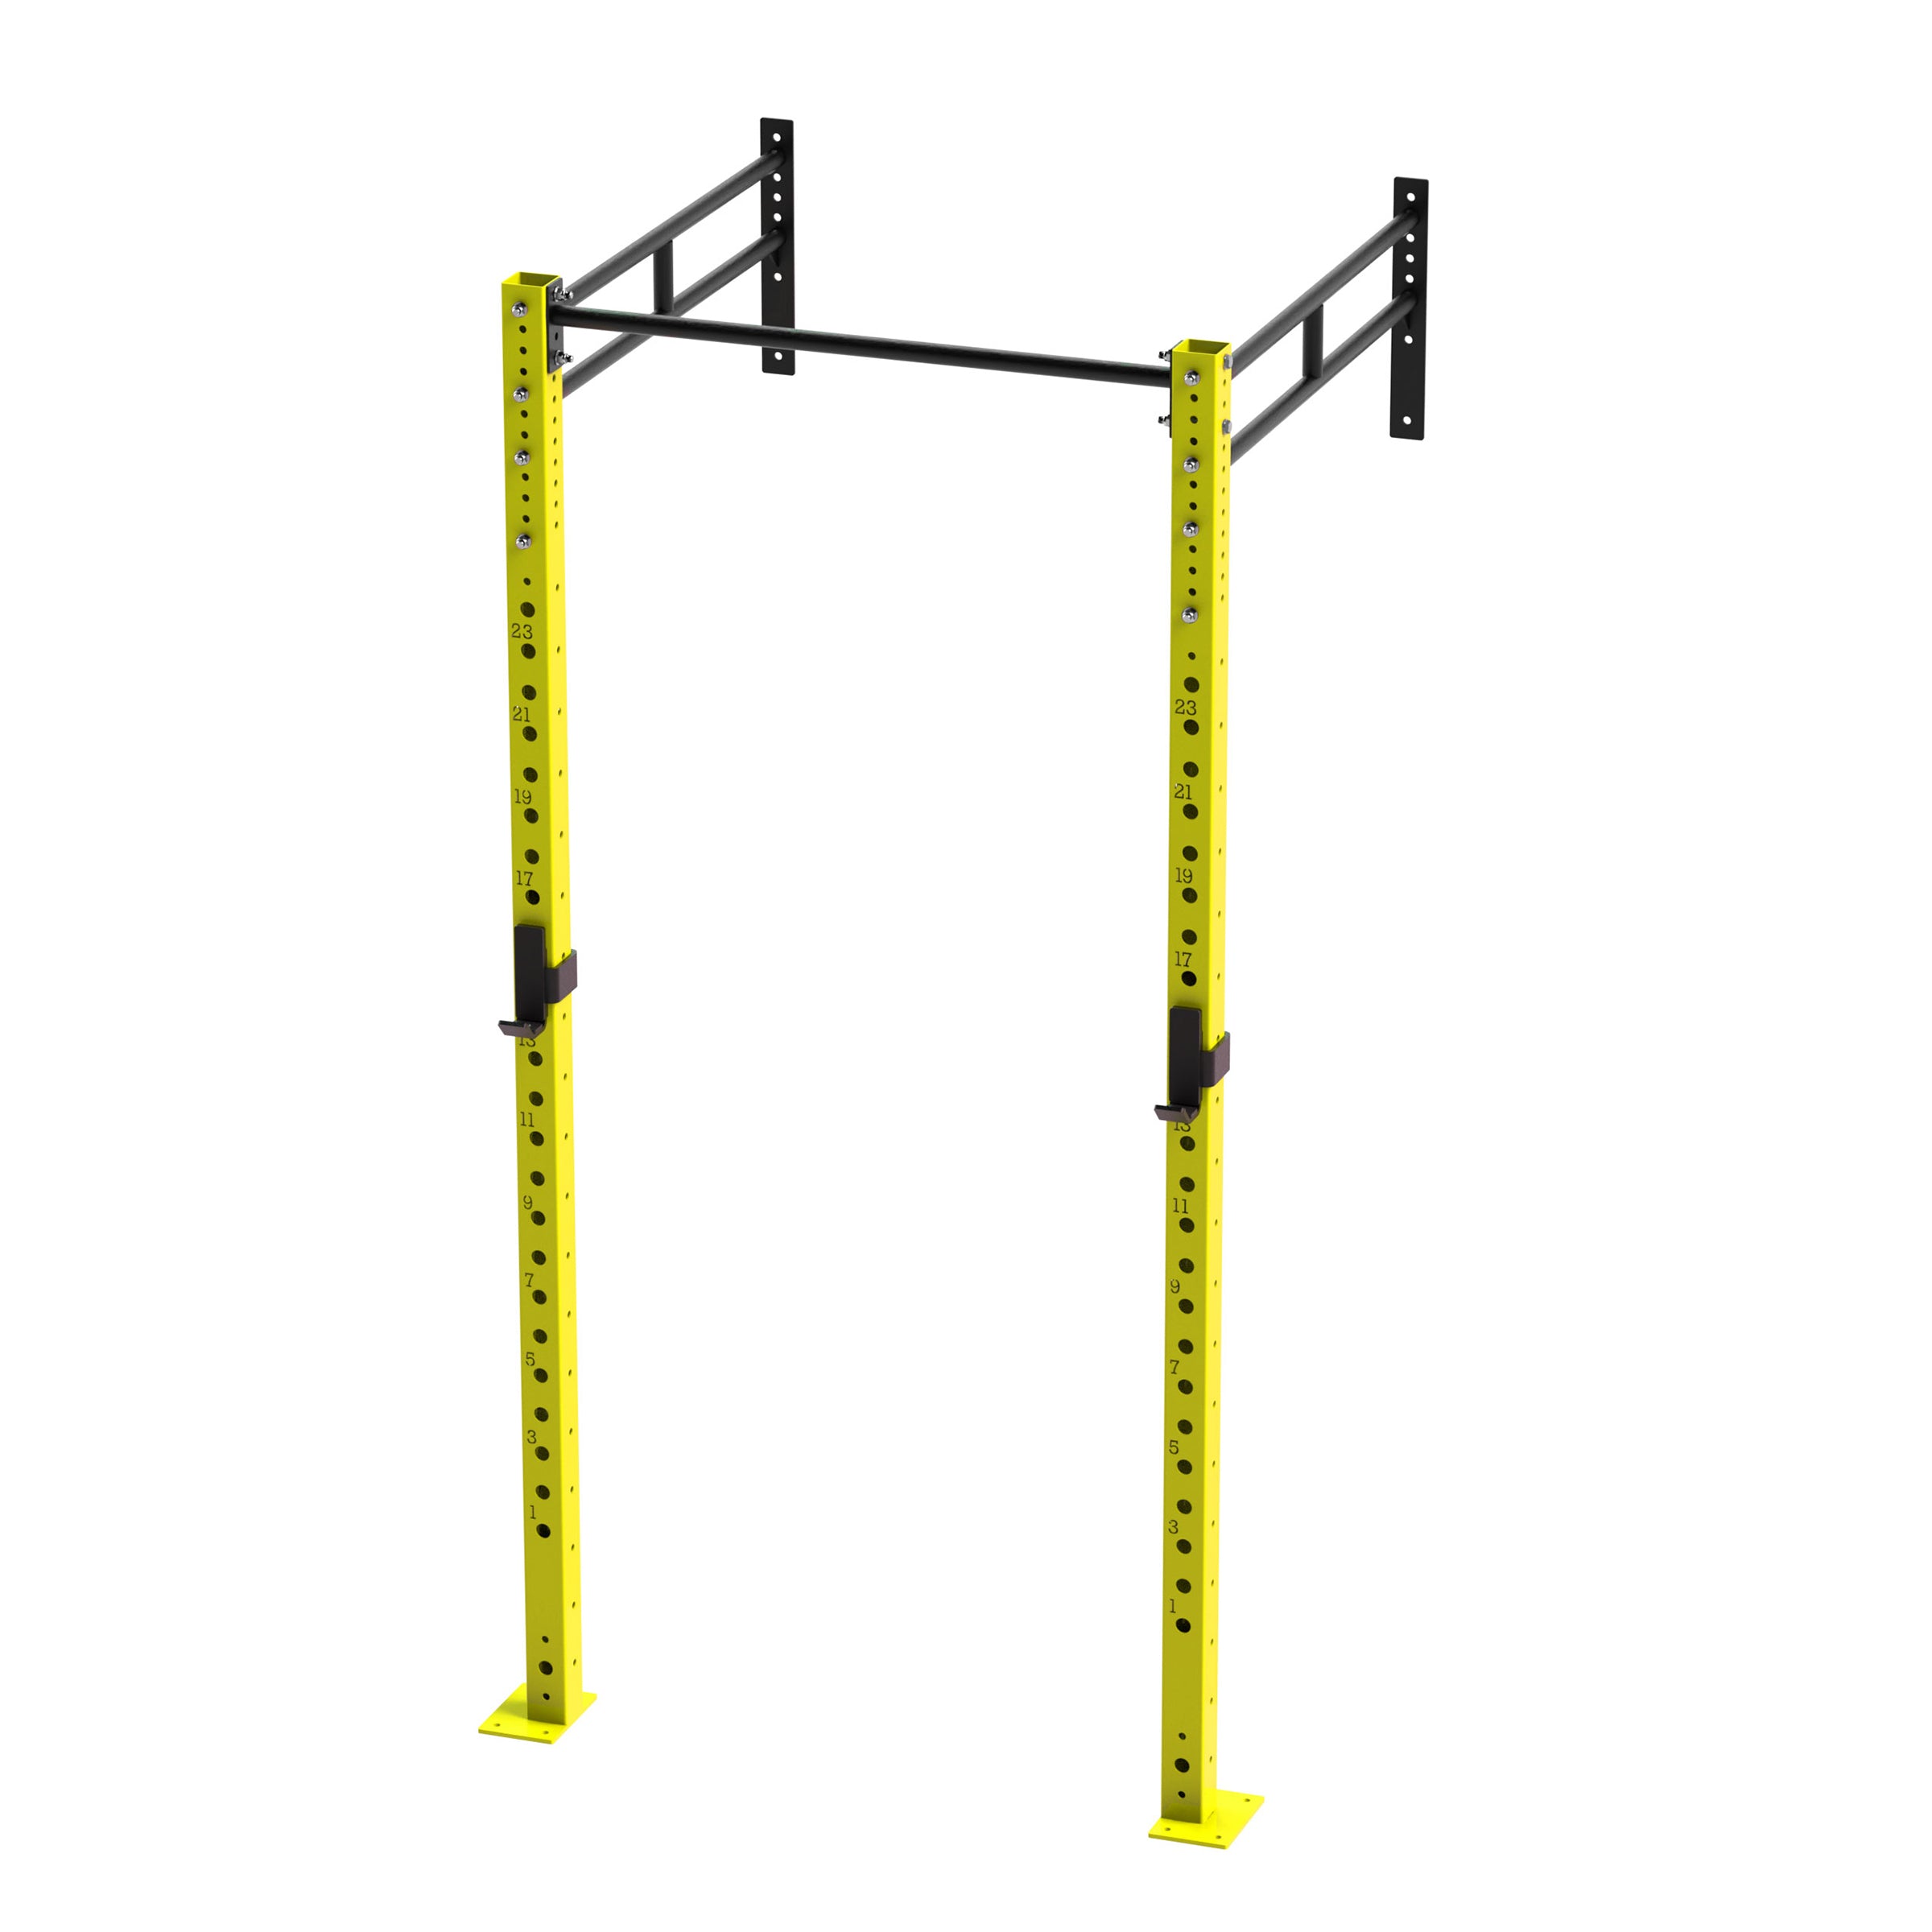 Bison Series - 1 Bay Wall Mounted Rig With Dual connector Bar - Wolverson Fitness